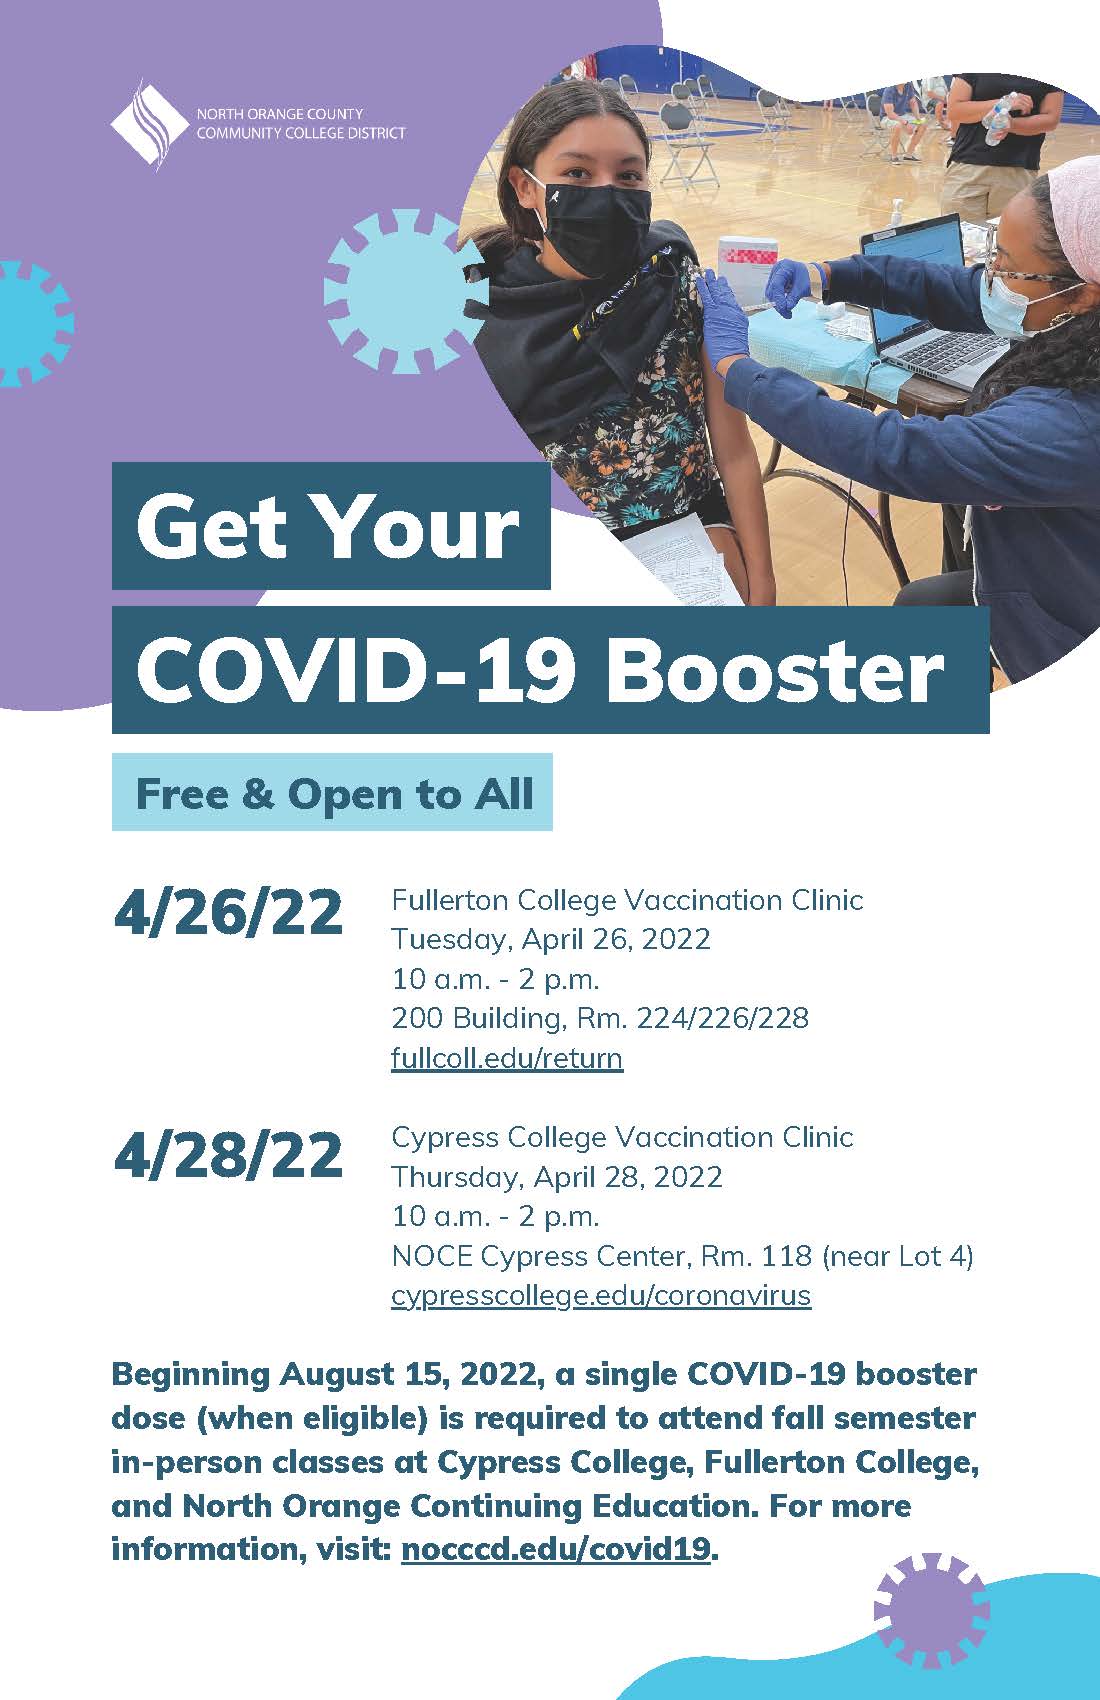 COVID-19 booster information